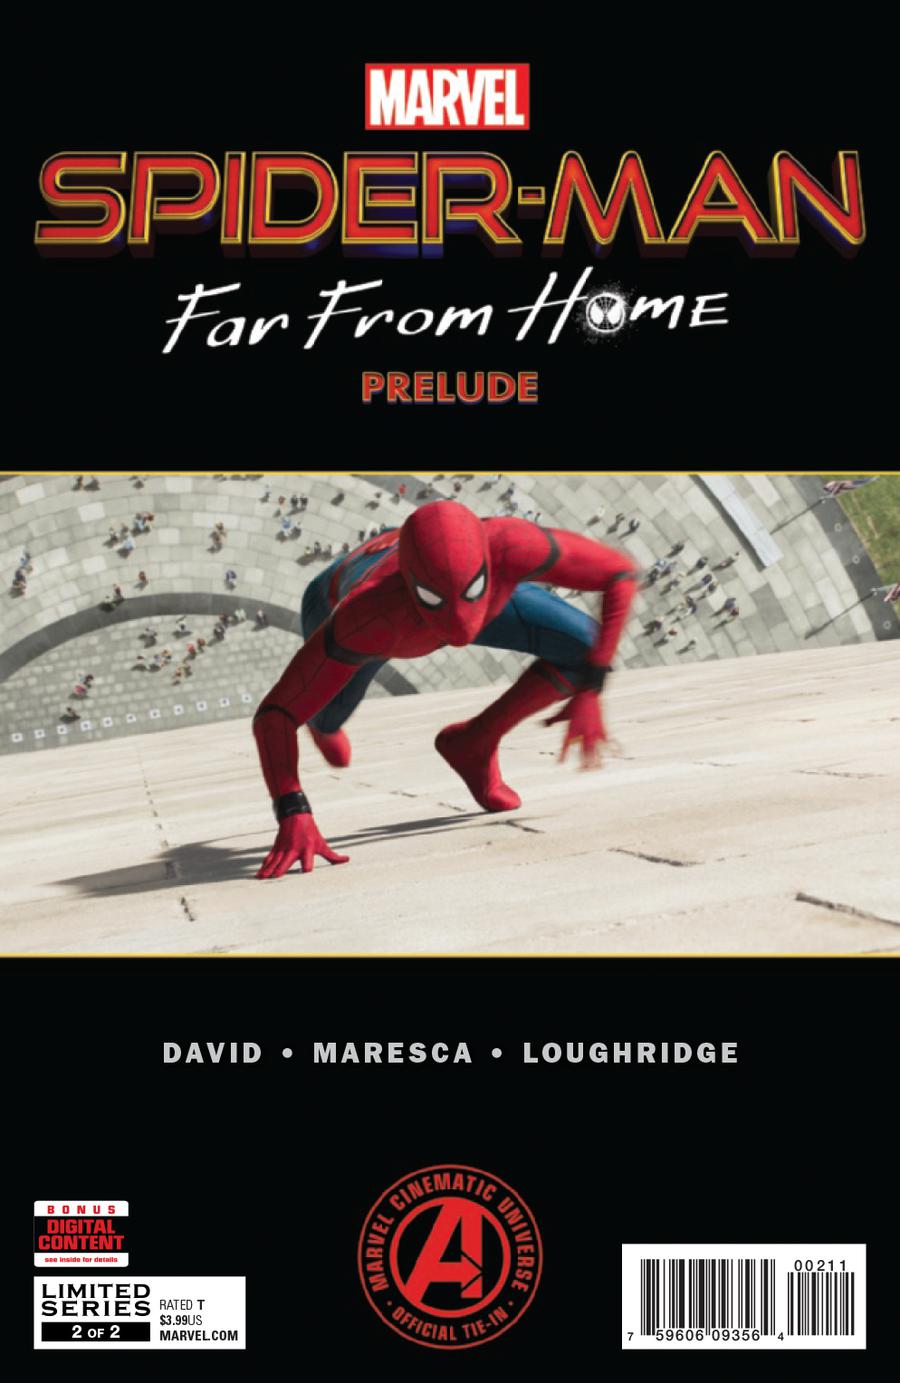 Marvels Spider-Man Far From Home Prelude #2